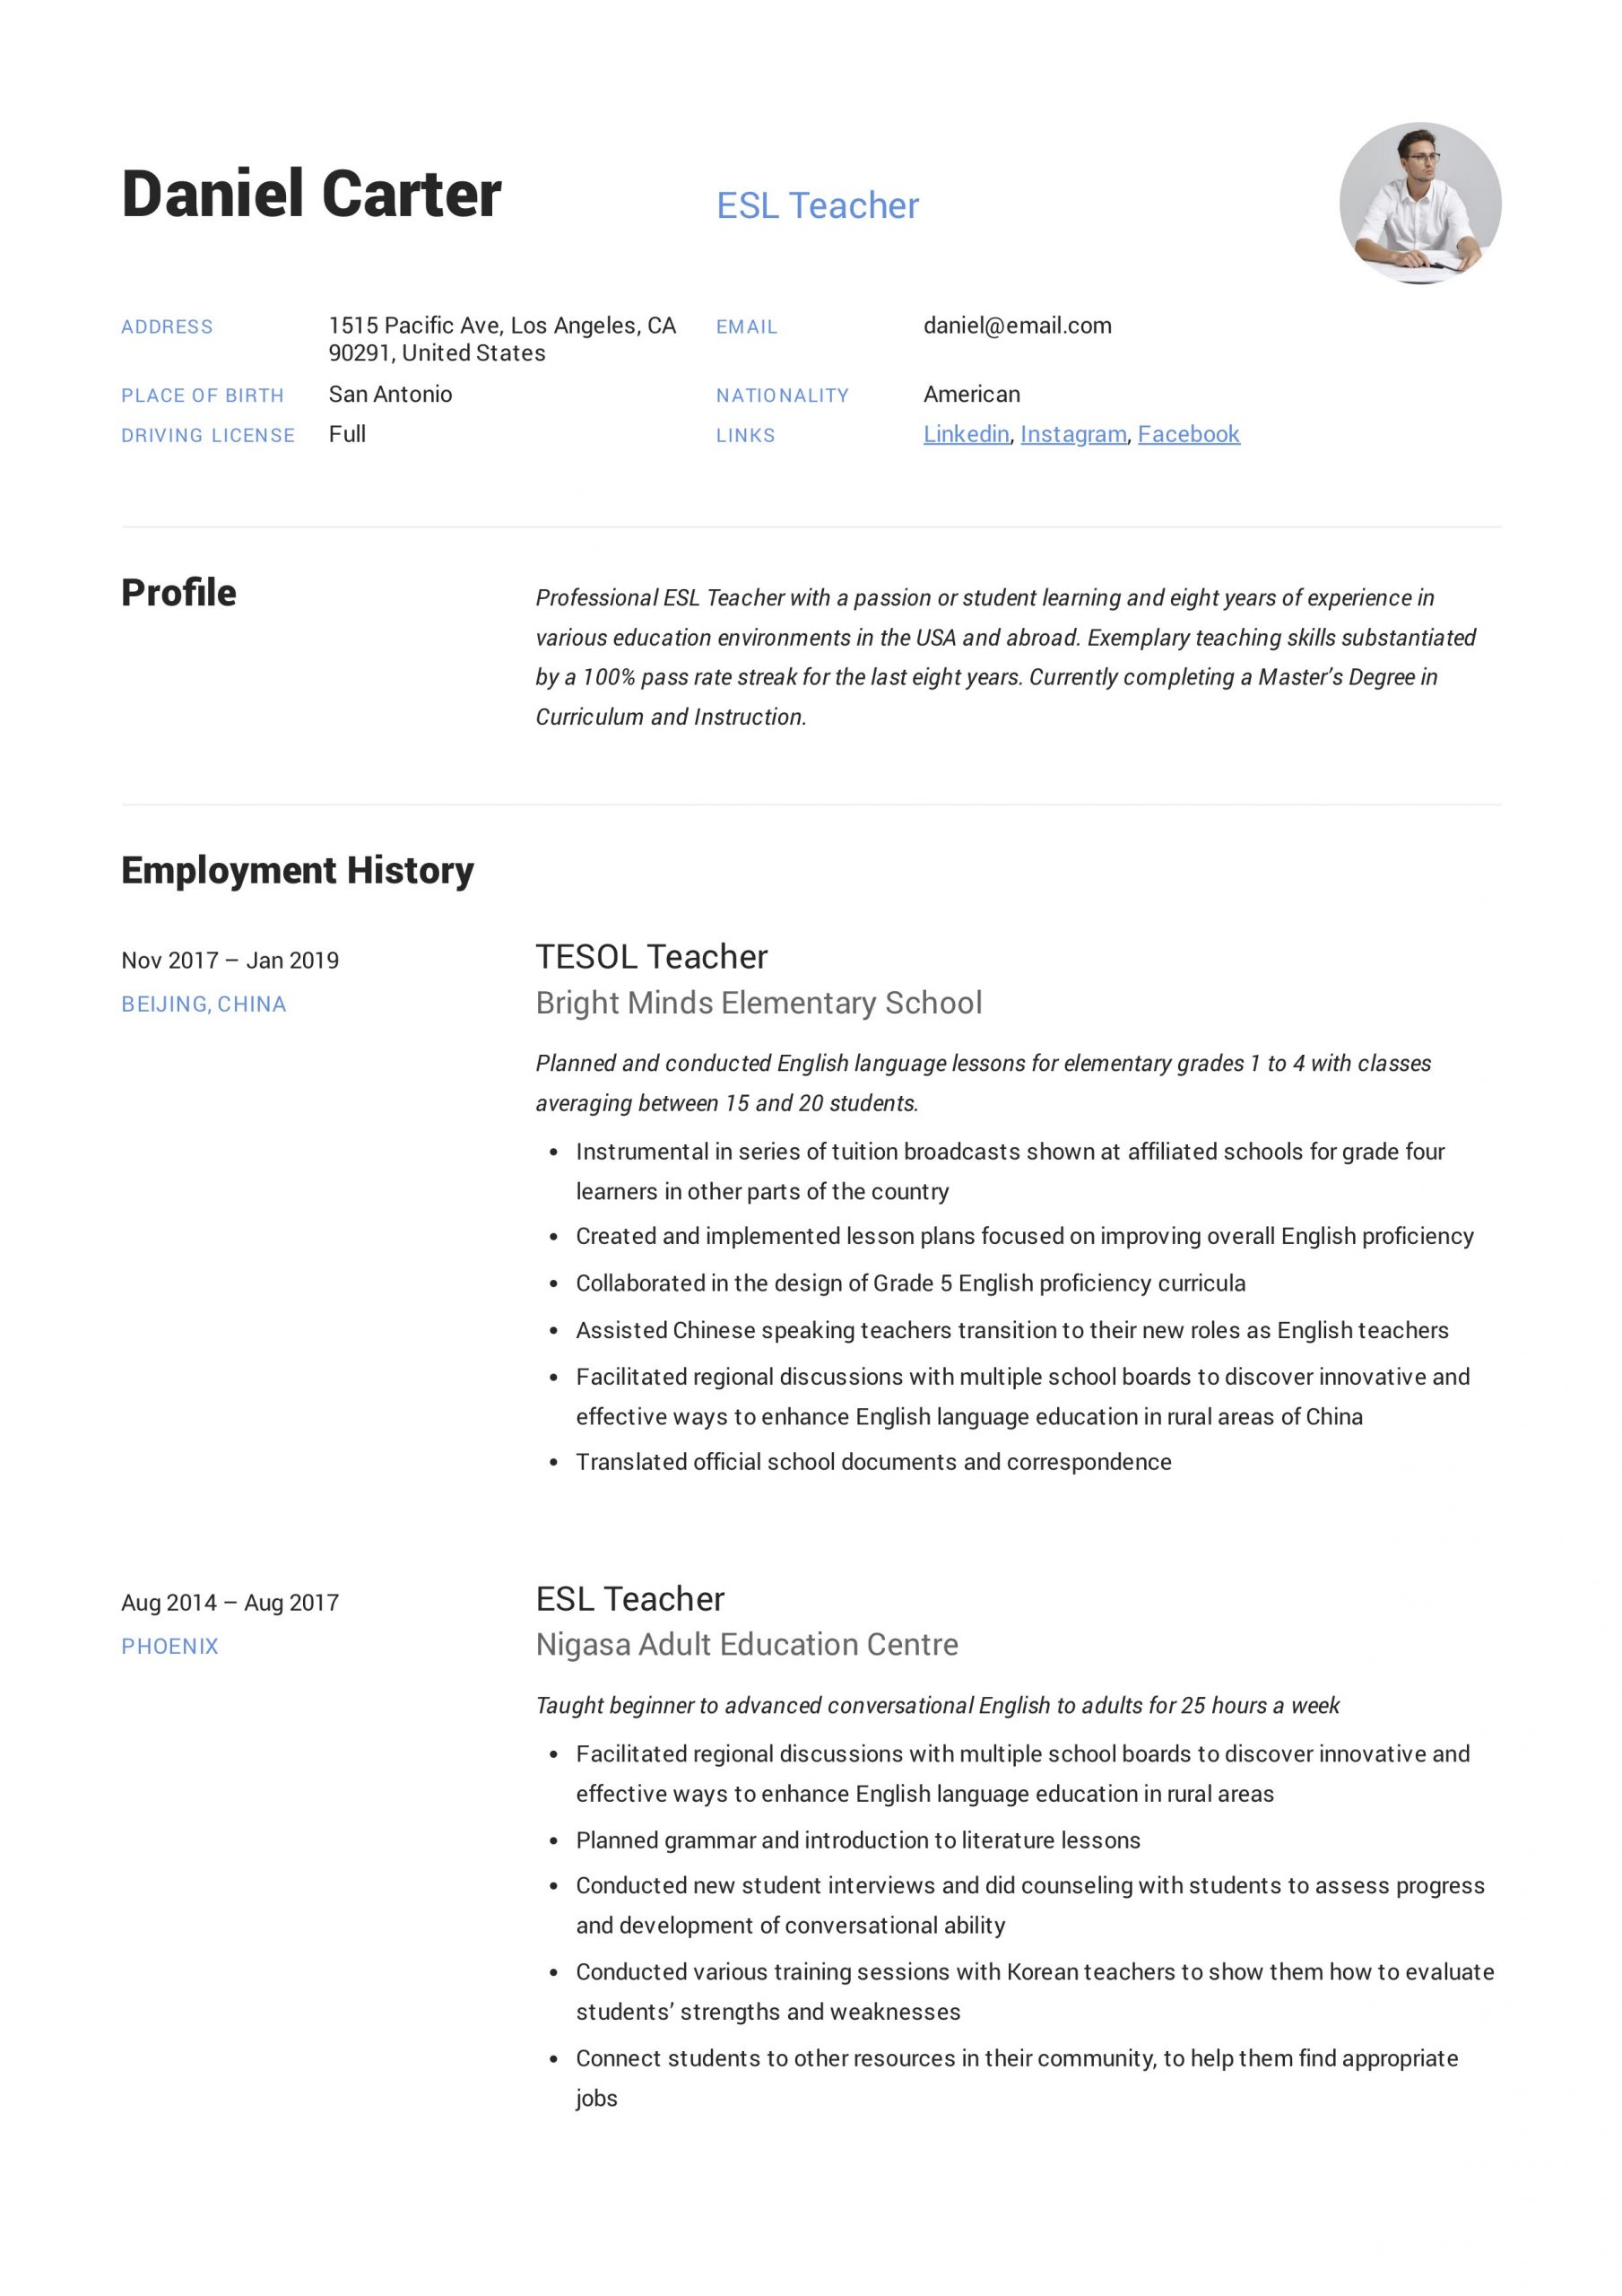 Sample Resume for Teaching Job with Experience 19 Esl Teacher Resume Examples & Writing Guide